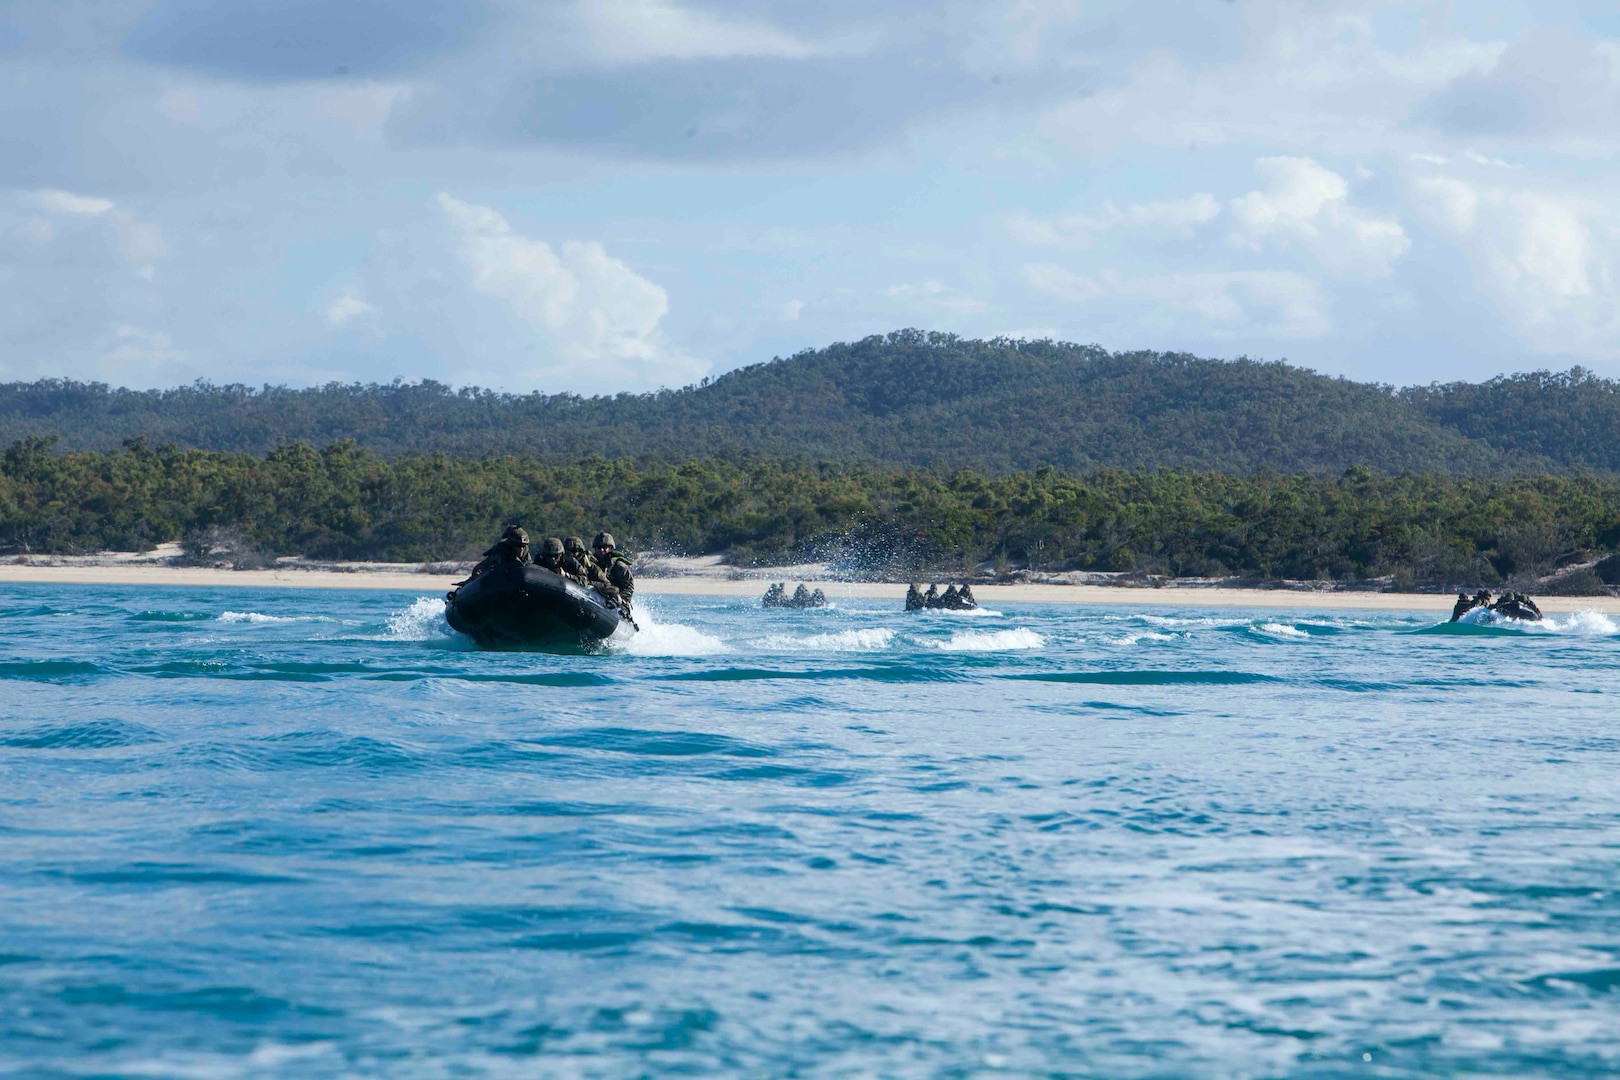 Marines with Lima Company, Battalion Landing Team, 3rd Battalion, 5th Marines, 31st Marine Expeditionary Unit, navigate Combat Rubber Raiding Craft off the coast of Australia during an amphibious landing as part of Talisman Saber 17, July 15th, 2017. Talisman Saber is a biennial exercise designed to improve the interoperability between Australian and U.S. forces. The 31st MEU is taking part in Talisman Saber 17 while deployed on its regularly-scheduled patrol of the Indo-Asia-Pacific region. (U.S. Marine Corps photo by Lance Cpl. Jonah Baase/Released)